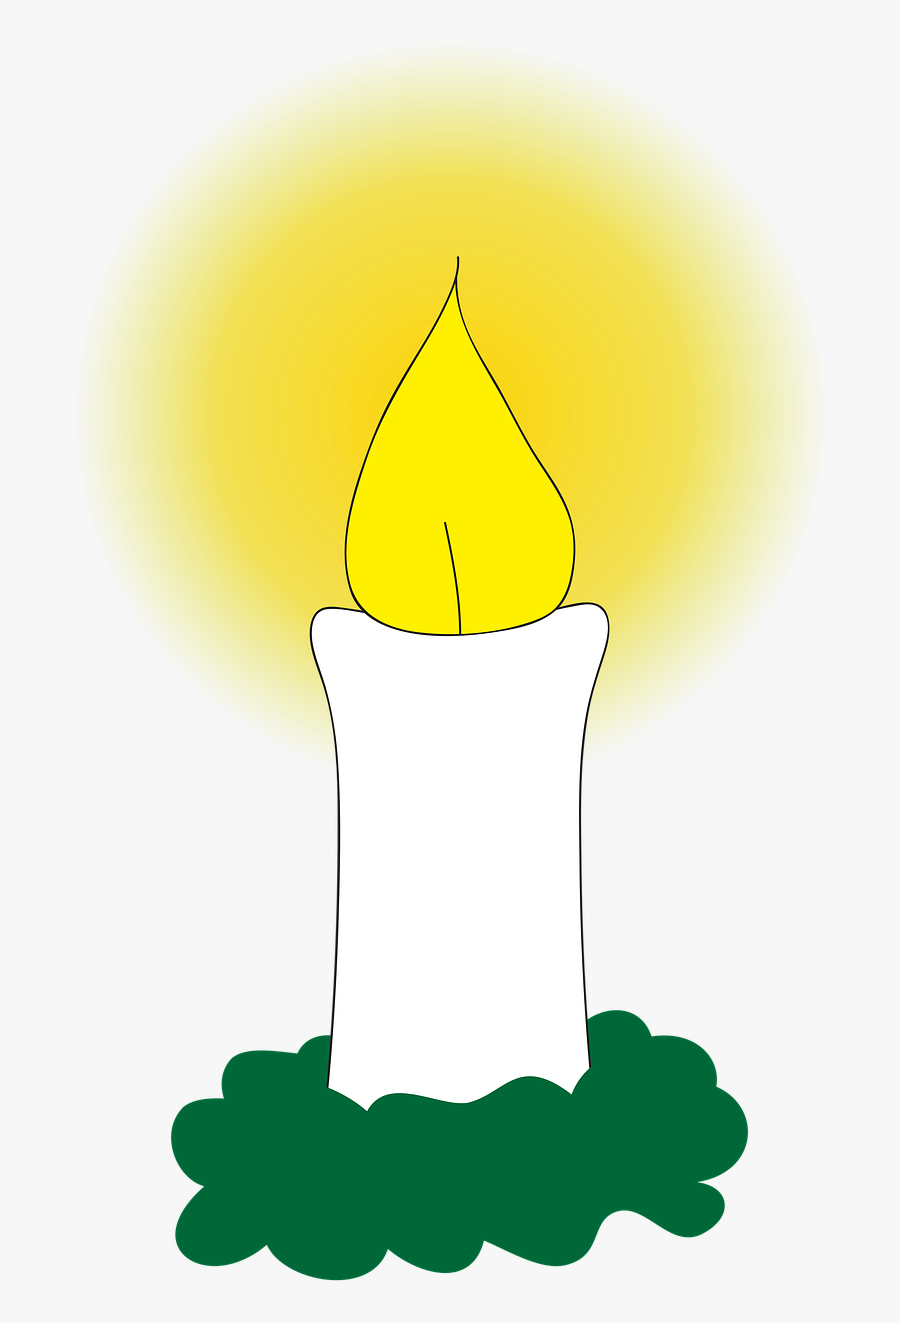 Candle Candle Light Flame Free Picture - Animated Candle Light Transparent, Transparent Clipart